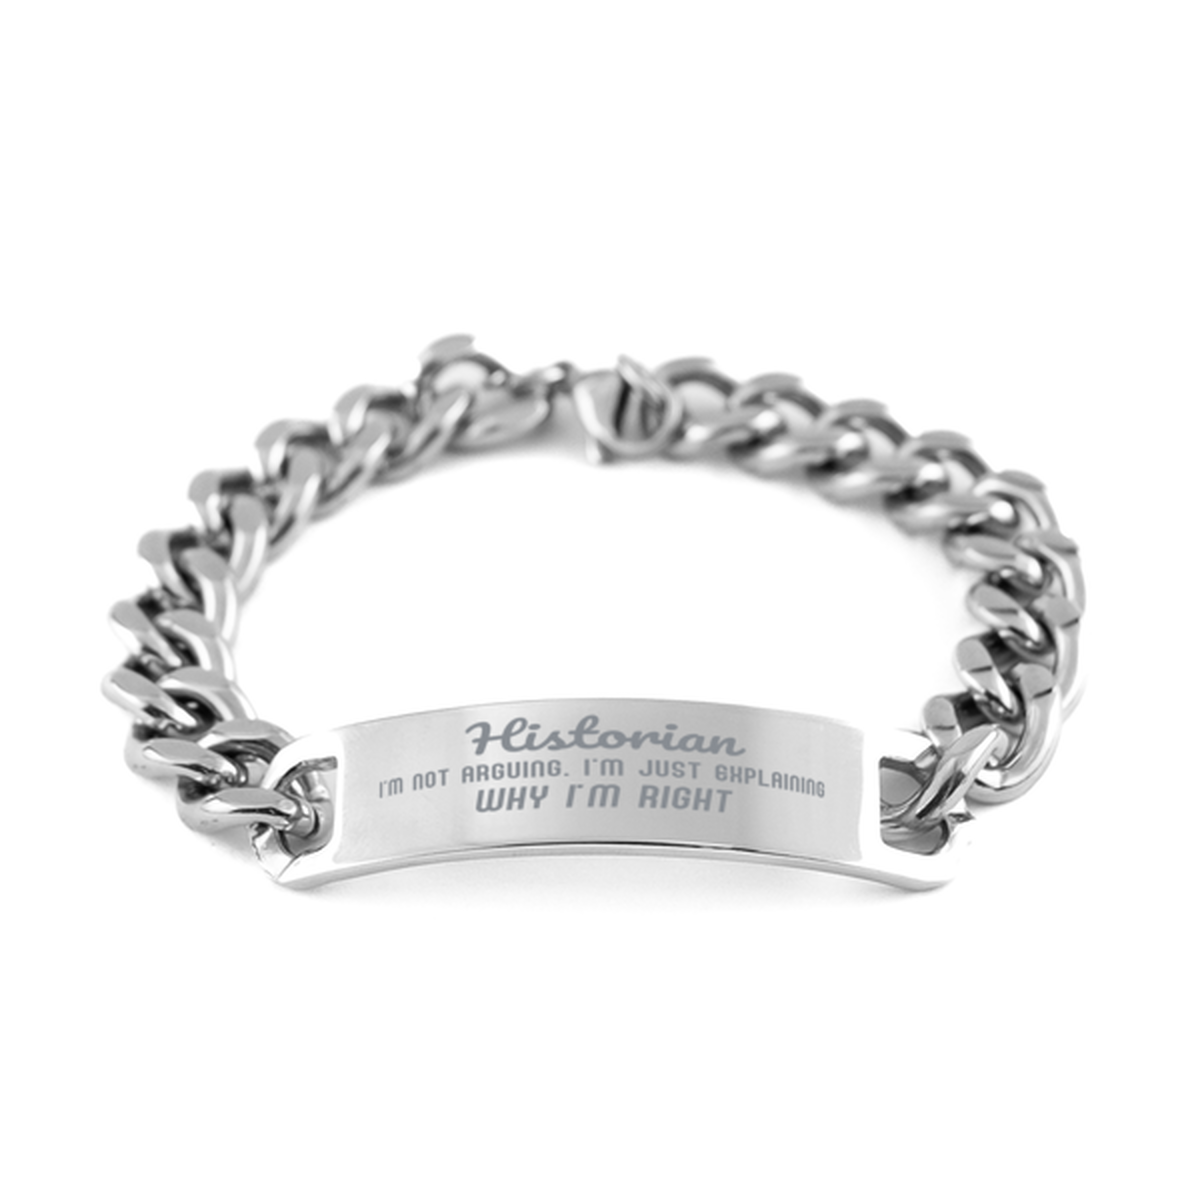 Historian I'm not Arguing. I'm Just Explaining Why I'm RIGHT Cuban Chain Stainless Steel Bracelet, Graduation Birthday Christmas Historian Gifts For Historian Funny Saying Quote Present for Men Women Coworker